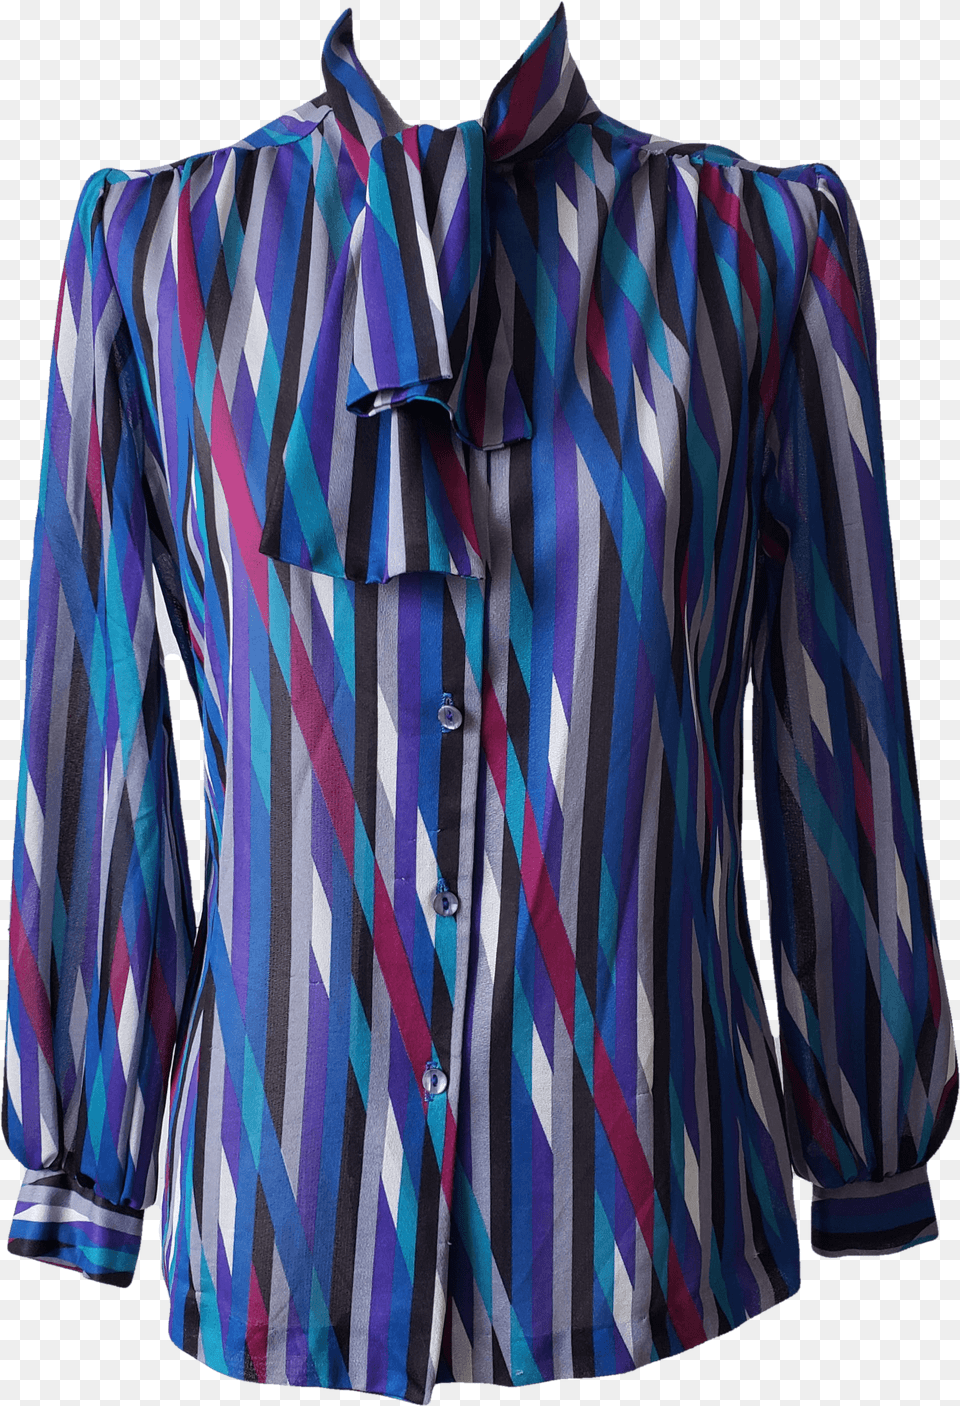 Blue Graphic Button Up Blouse By Teddi Of California Blouse, Clothing, Dress Shirt, Shirt, Long Sleeve Png